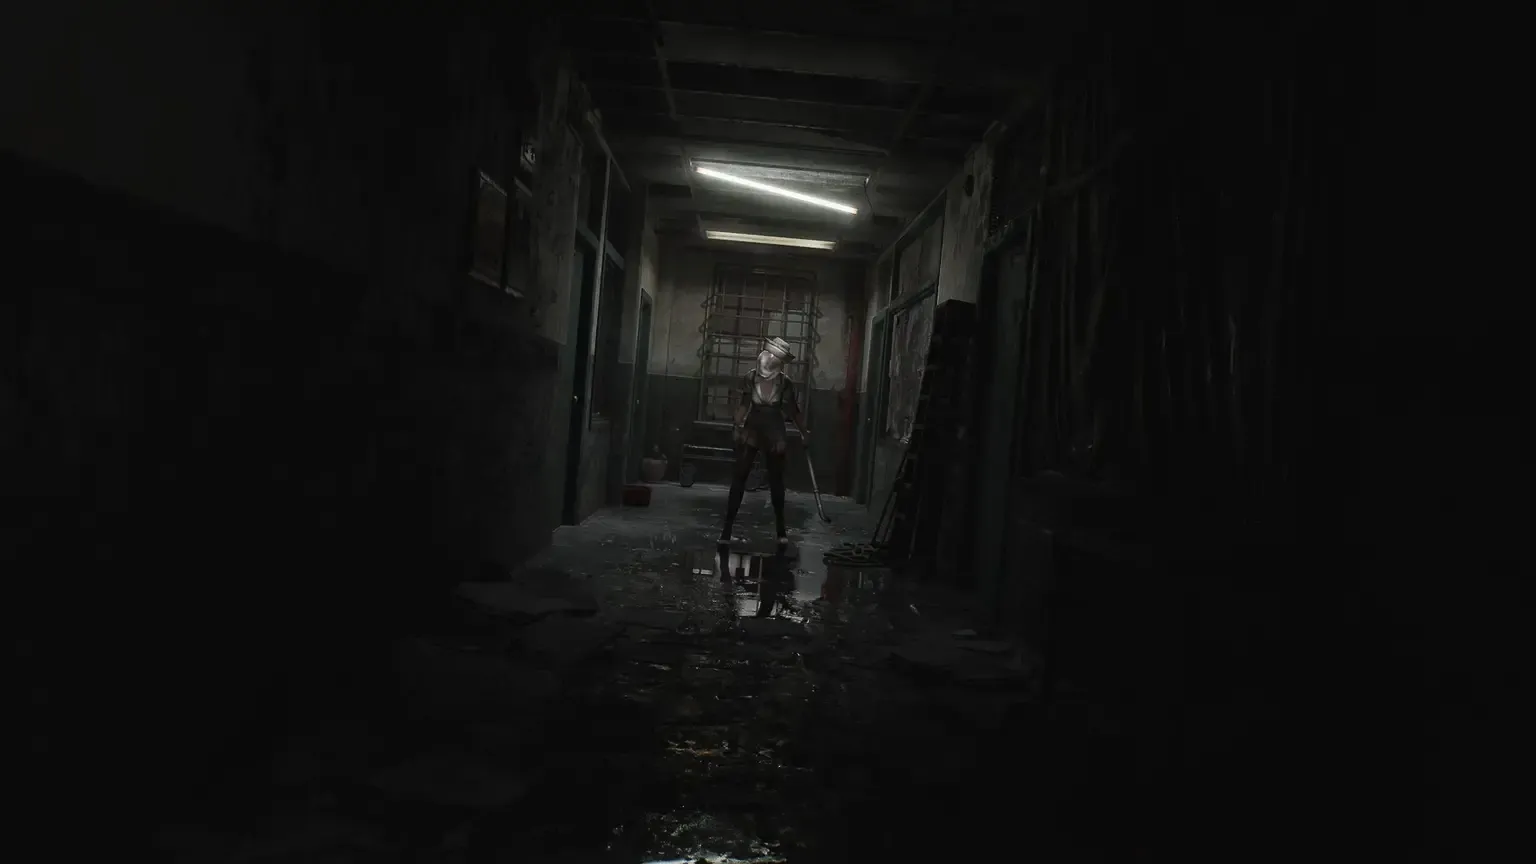 How Bloober Team can make Silent Hill 2 remake more authentic